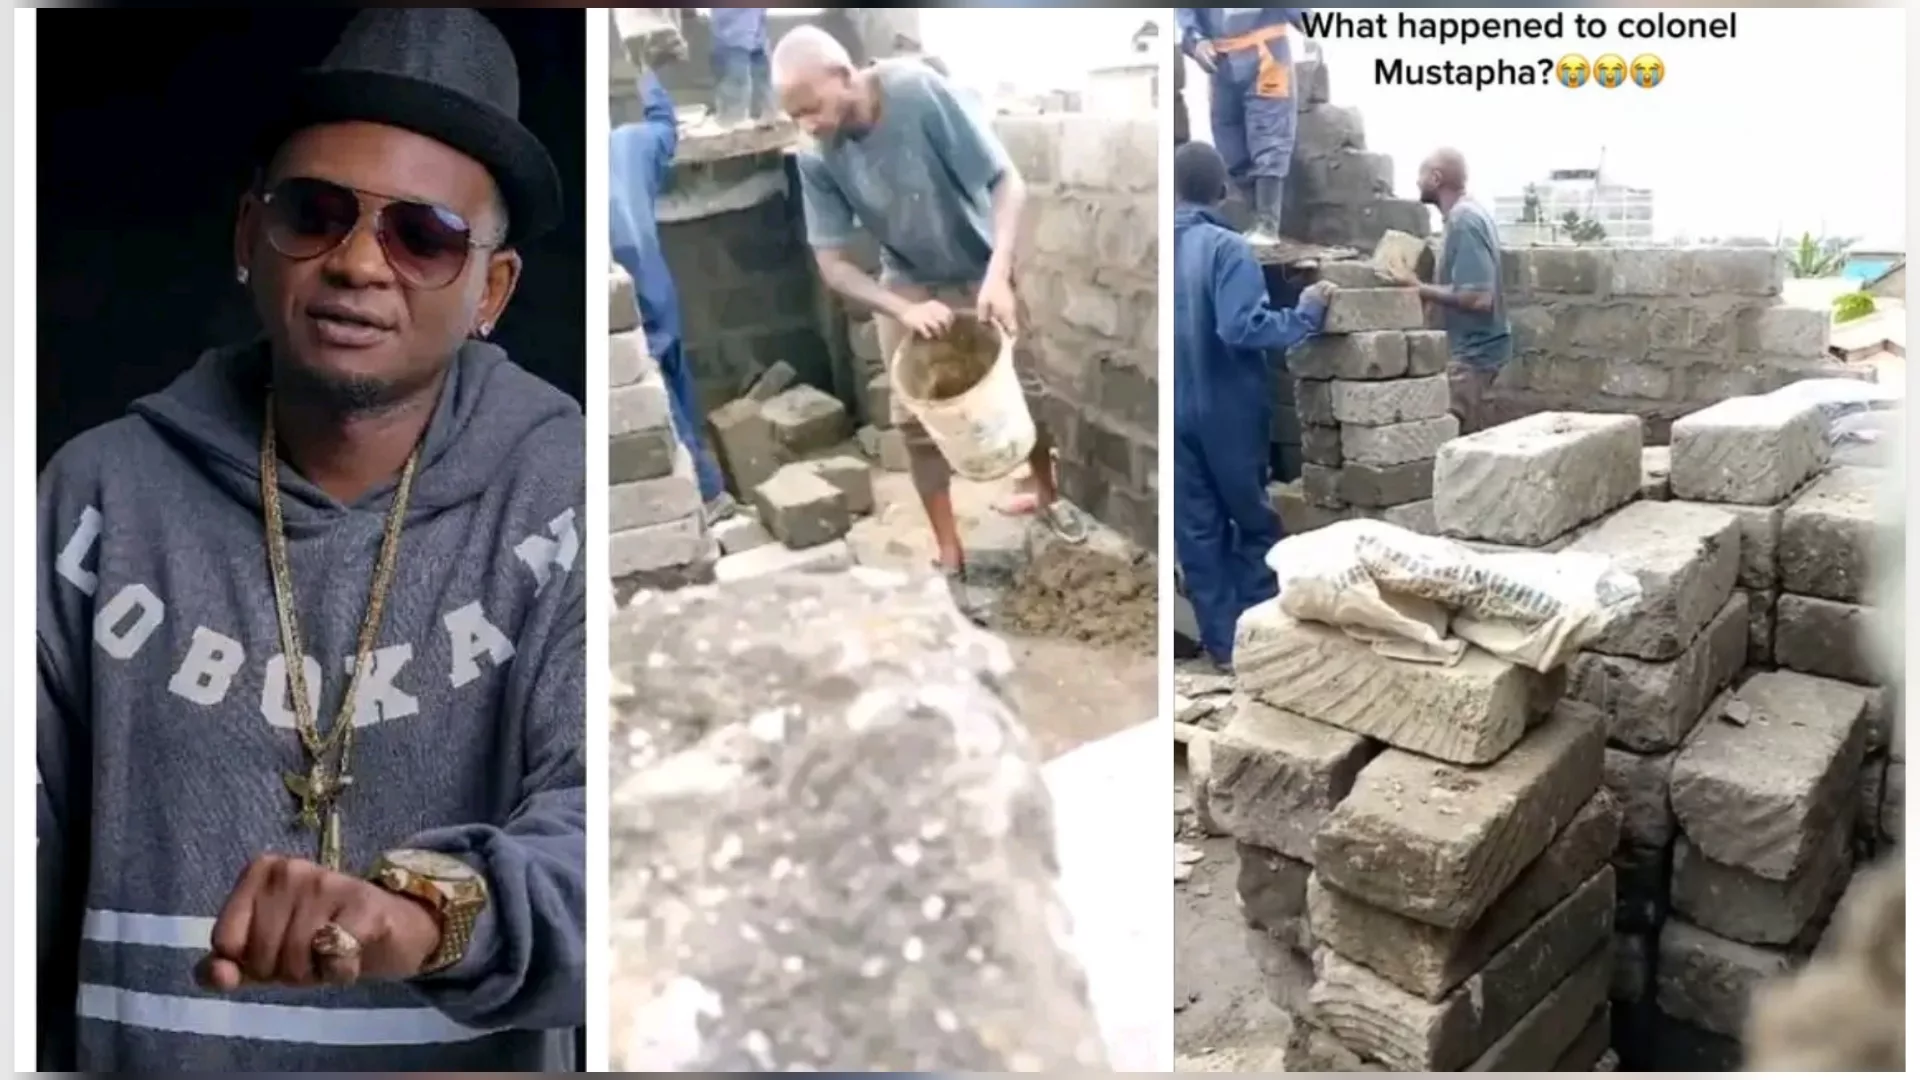 Mum ako na cancer ~ Video of colonel Mustafa working in a construction site mjengo goes vira